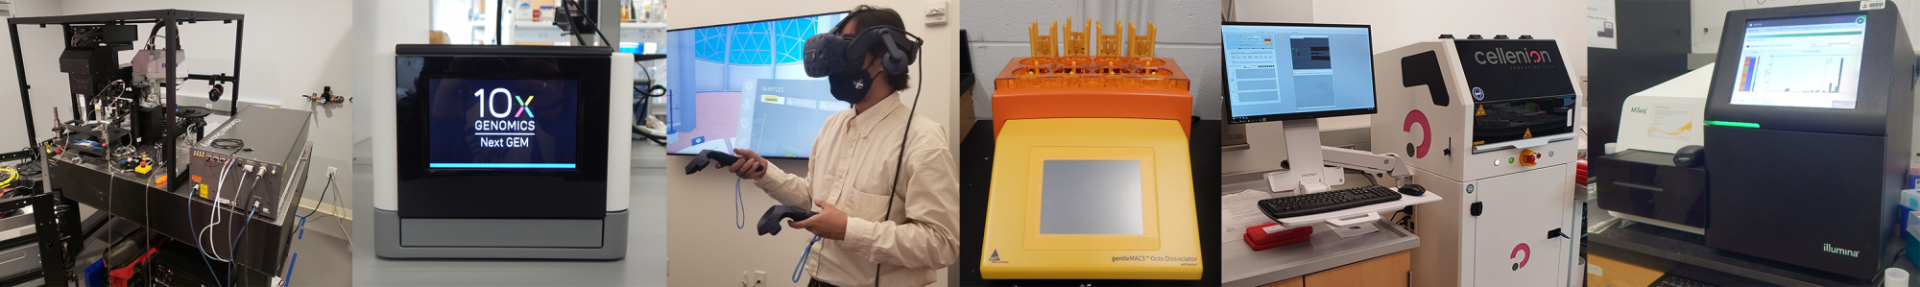 From left to right, pictures of microscope and cell spotter used for DLP+, 10X chromium system, a researcher using VR, tissue dissociator, DLP+, and MiSeq DNA sequencer.